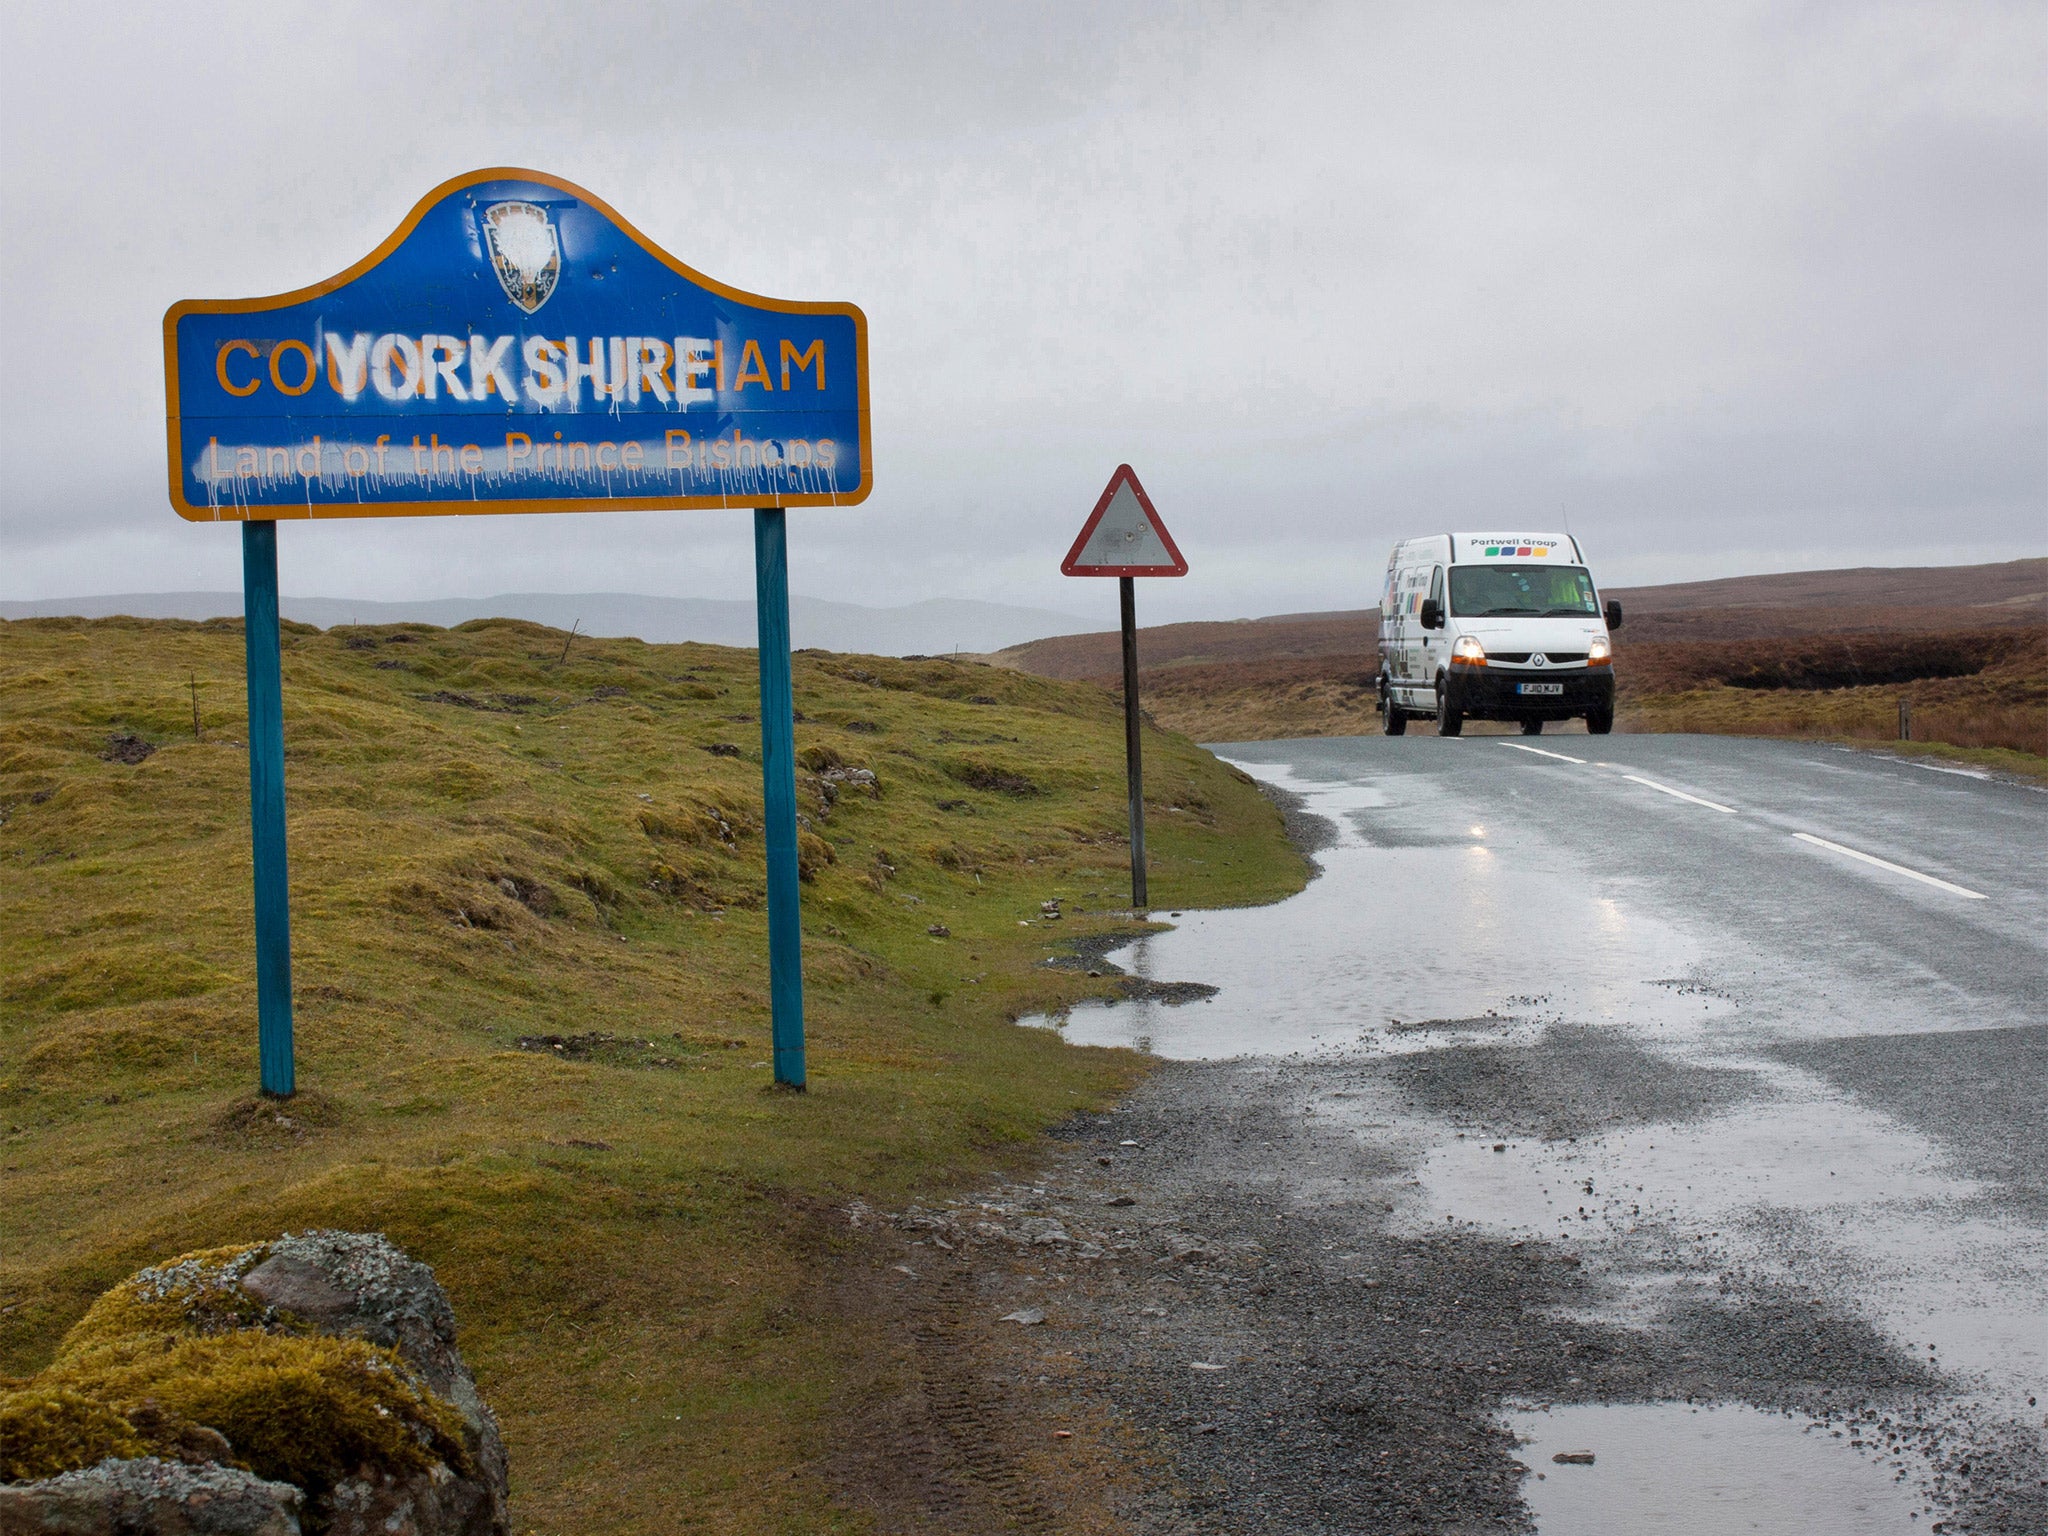 County boundary changes in 1974 brought part of the North Riding of Yorkshire into County Durham. Here, on the B6276, the sign has been painted over with the white rose of Yorkshire and county name